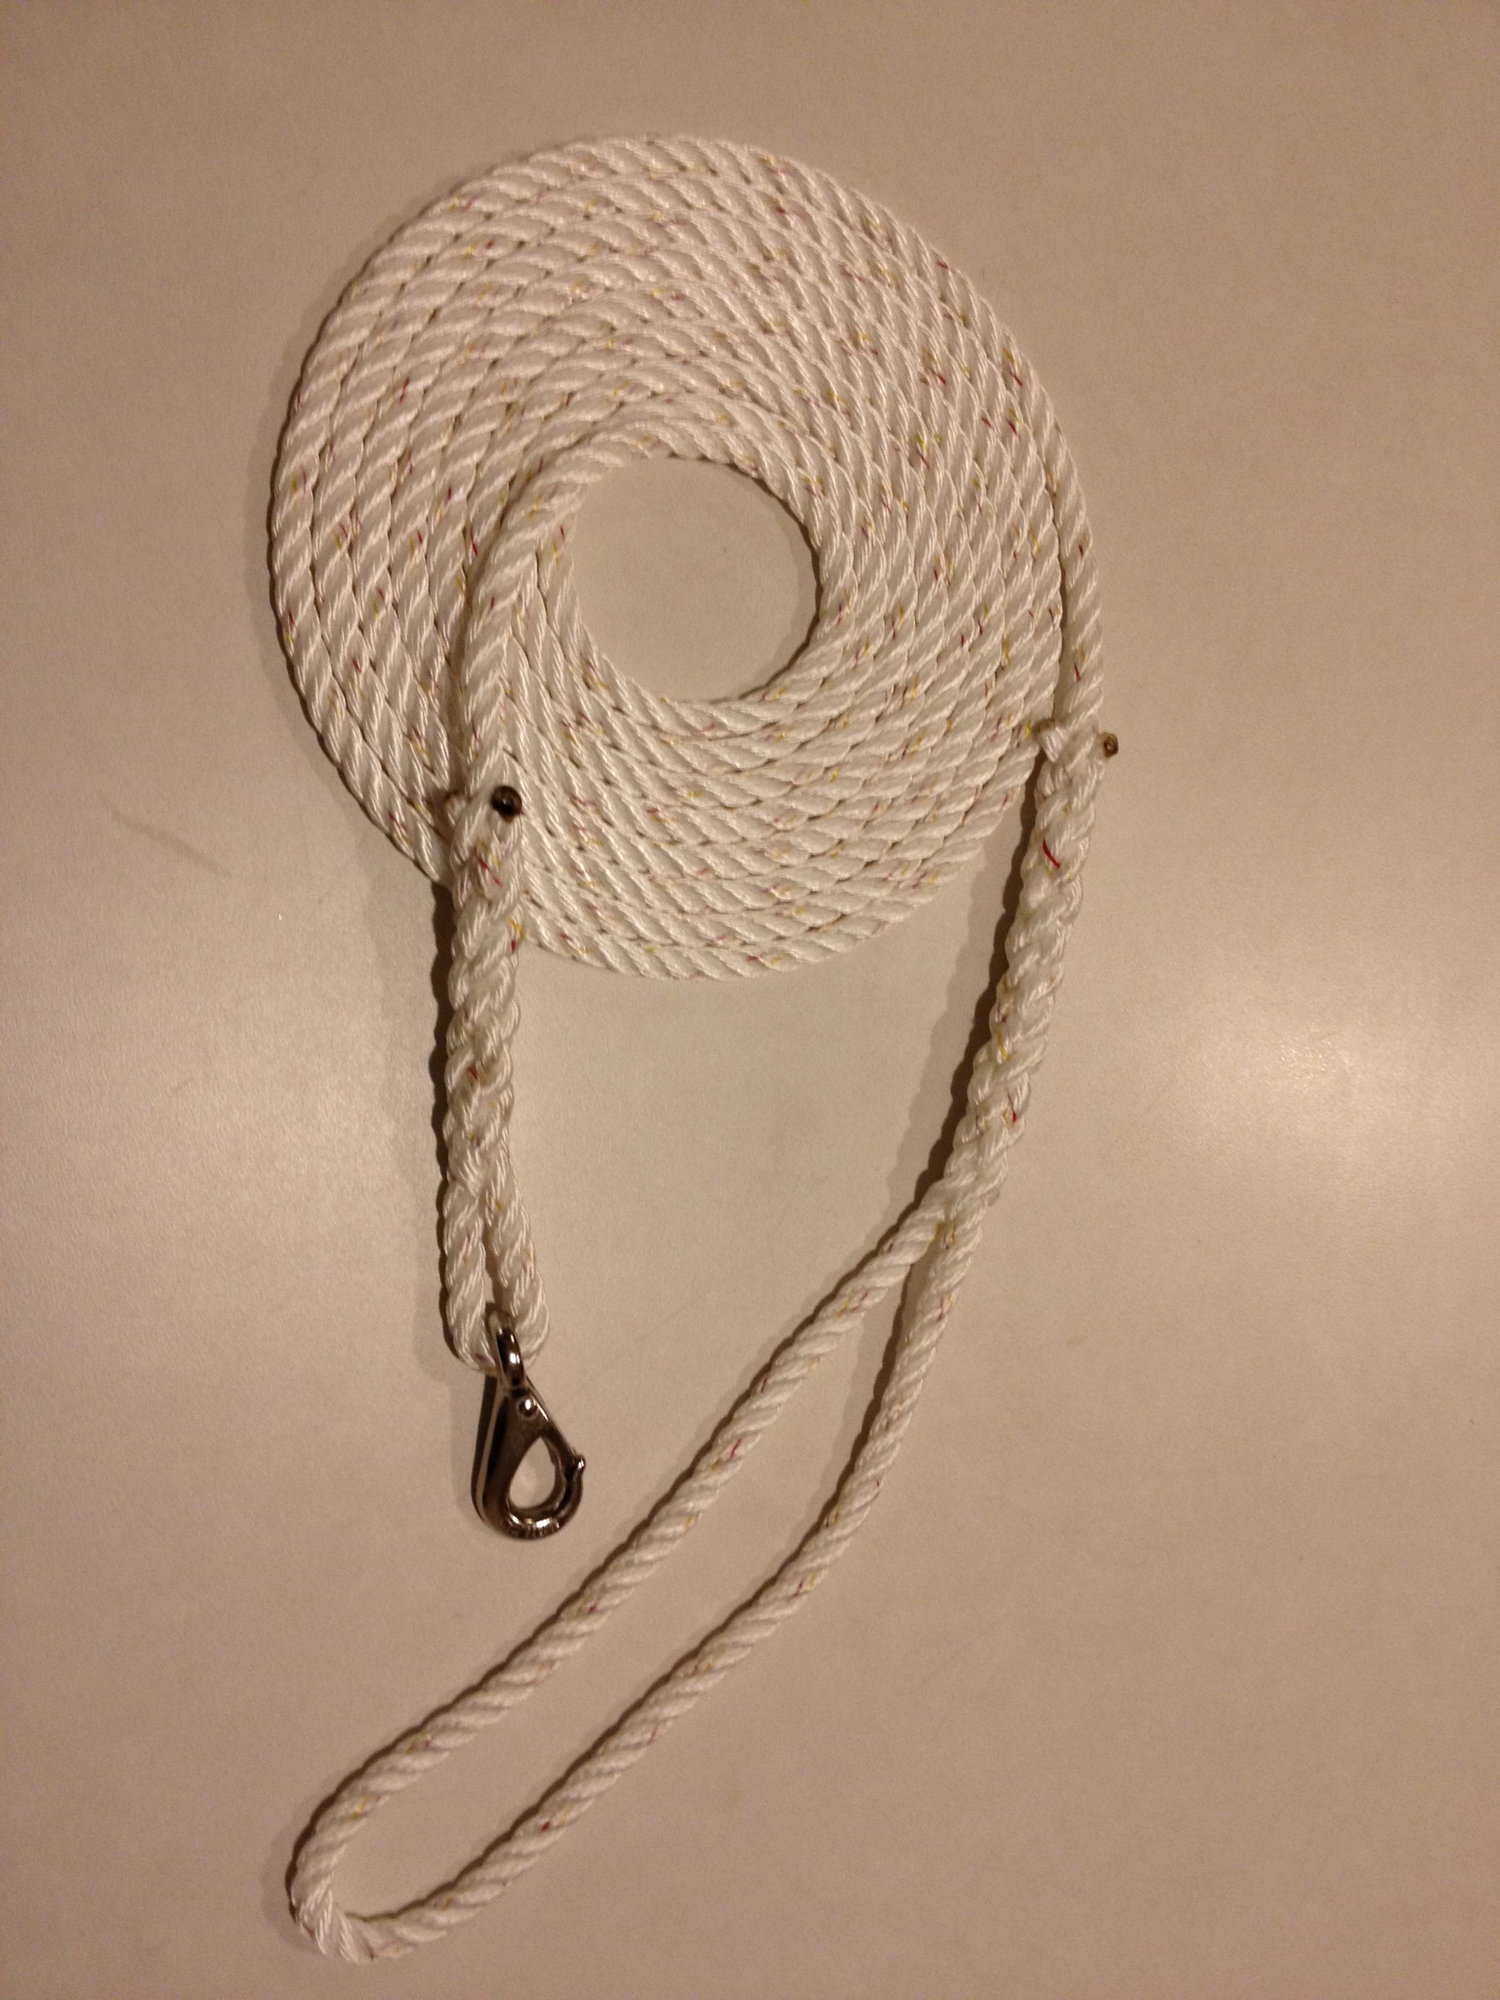 Offshore rod and reel leashes - The Hull Truth - Boating and Fishing Forum